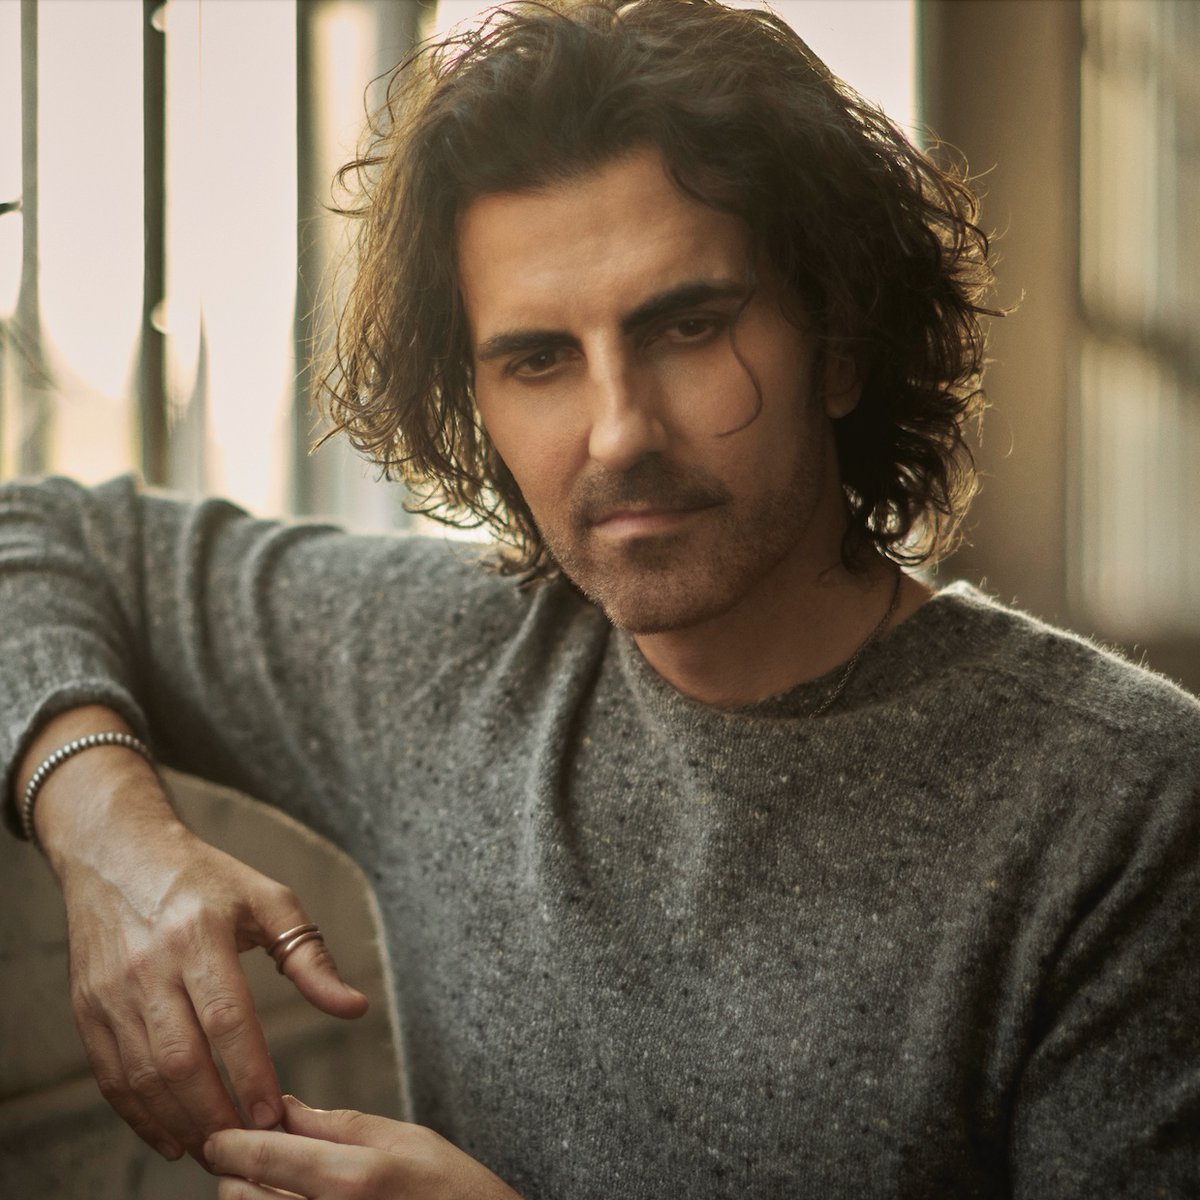 'Three things I’m most passionate about—music, wine, and architecture—combined into this experience.' The latest musical offering from Canadian composer @stephanmoccio: apple.co/LegendsMyths